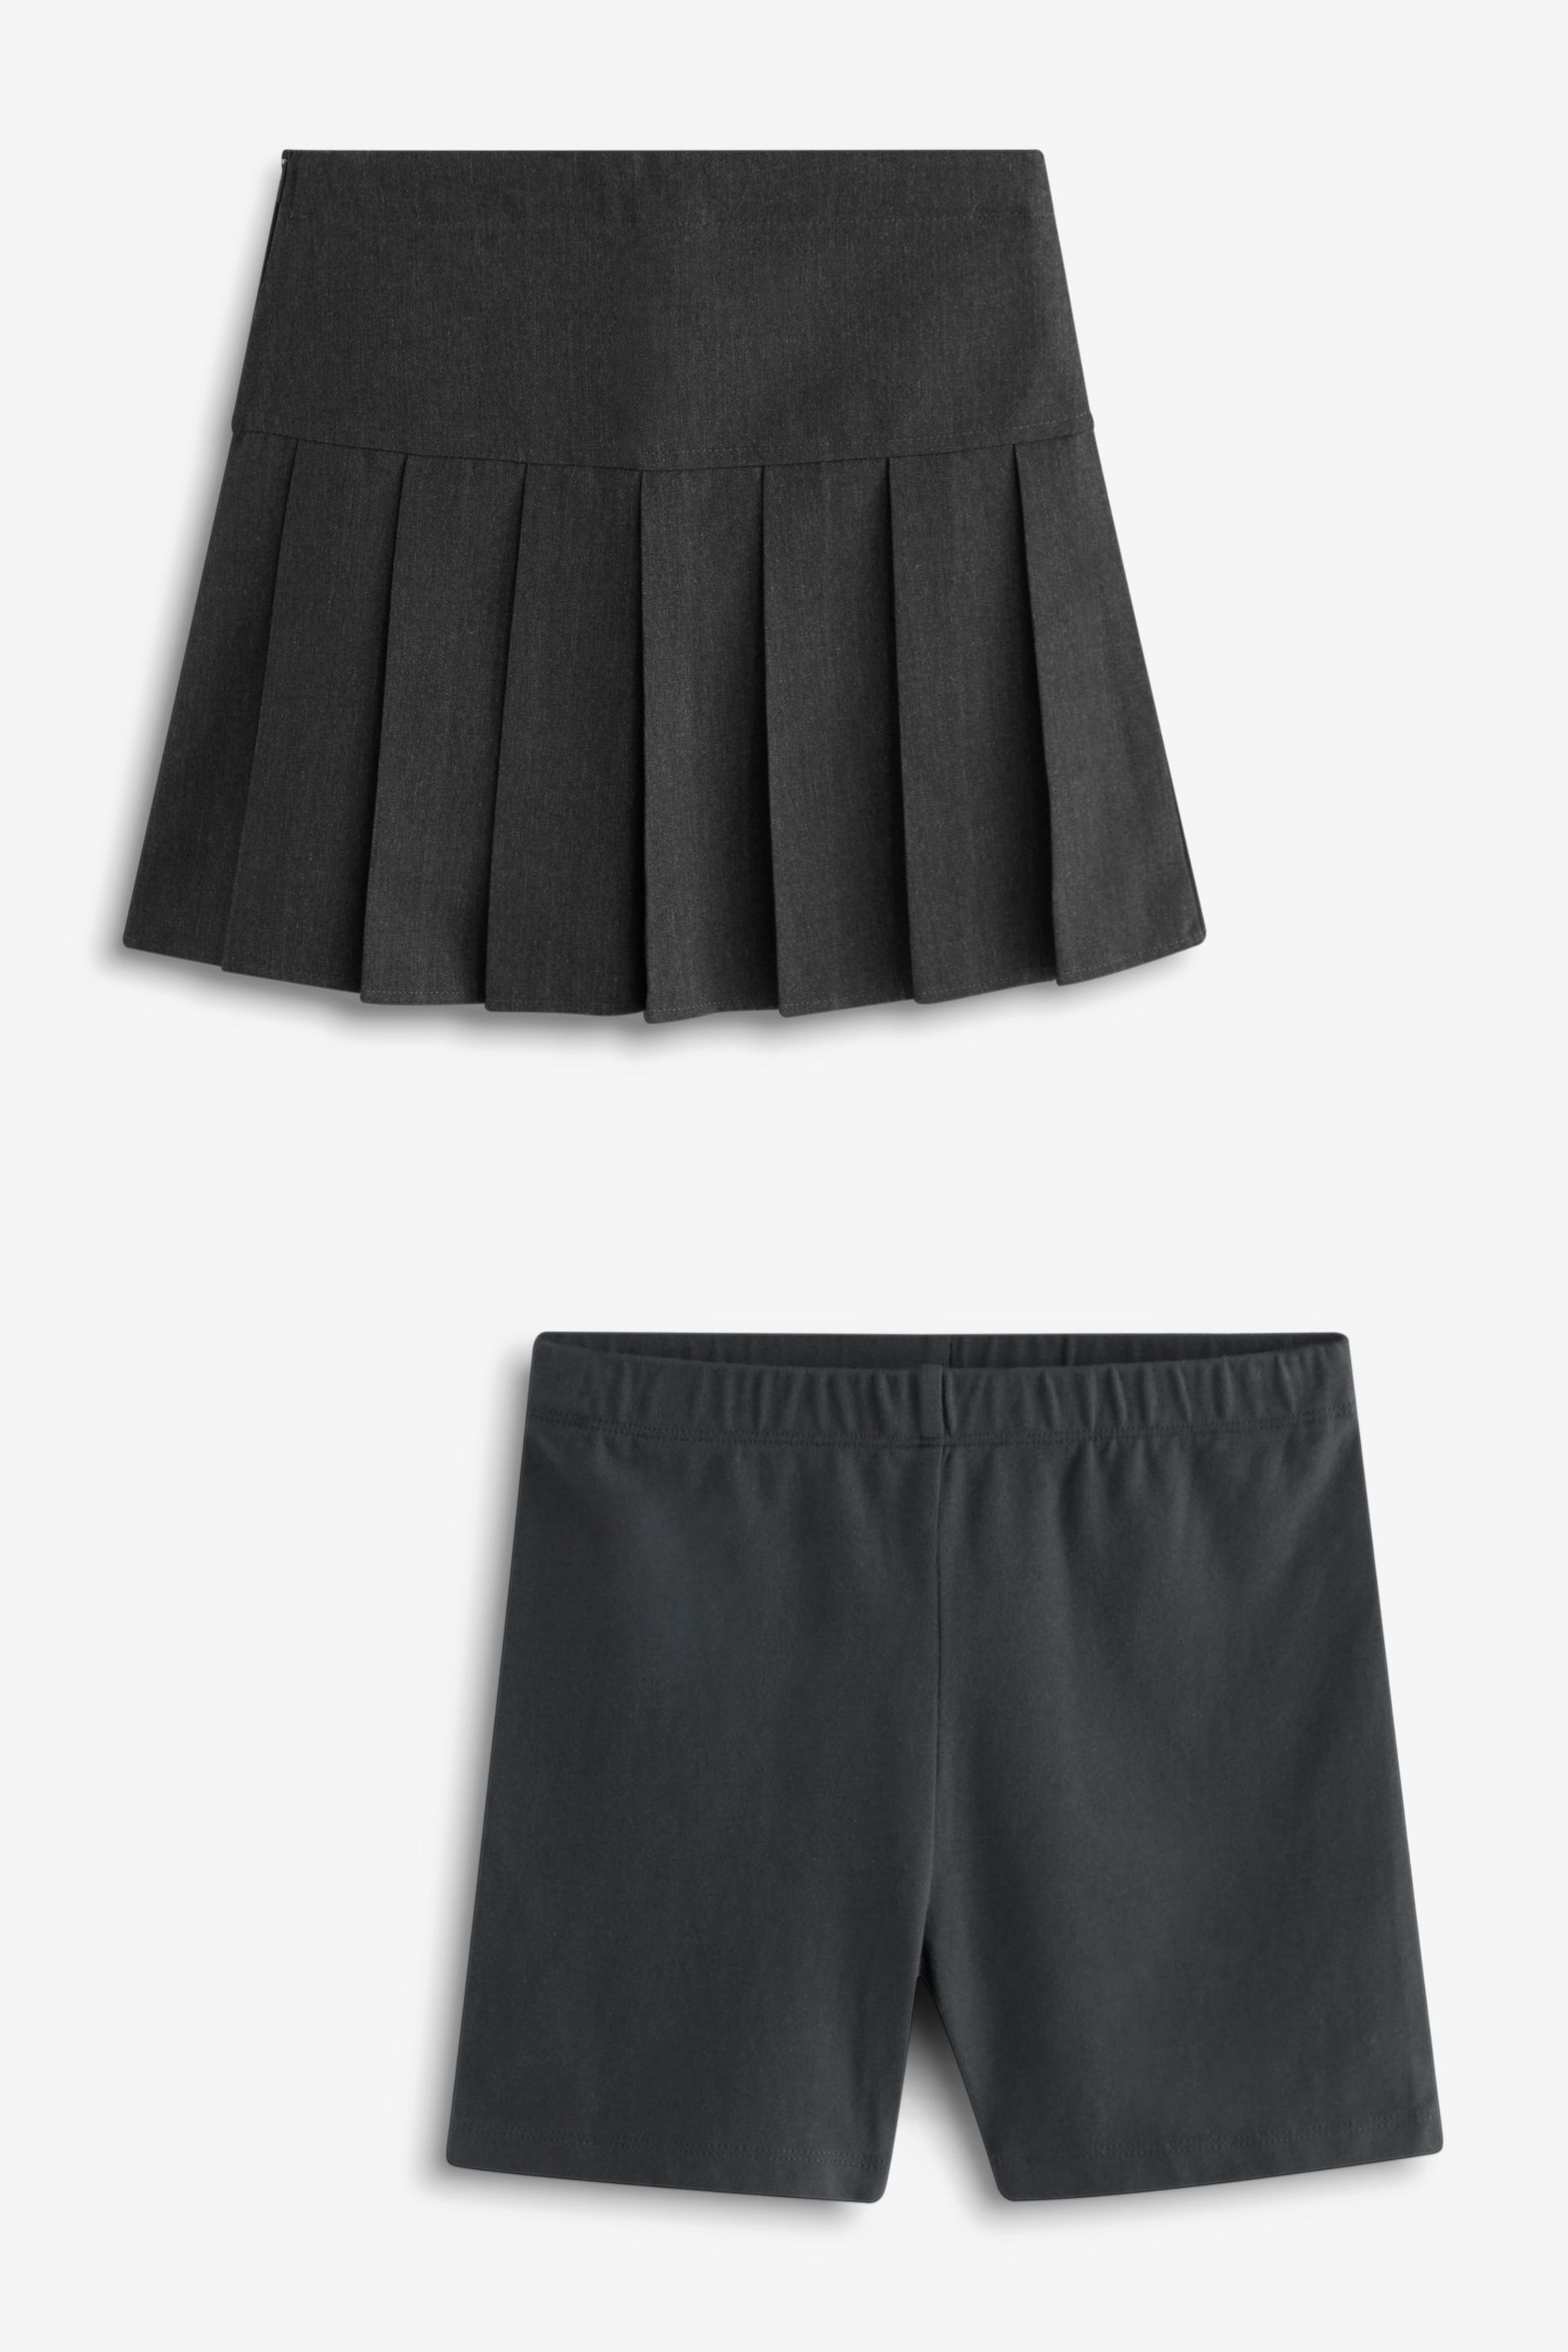 Grey Pleat Skirt And Cycle Shorts Set (3-17yrs) - Image 1 of 7